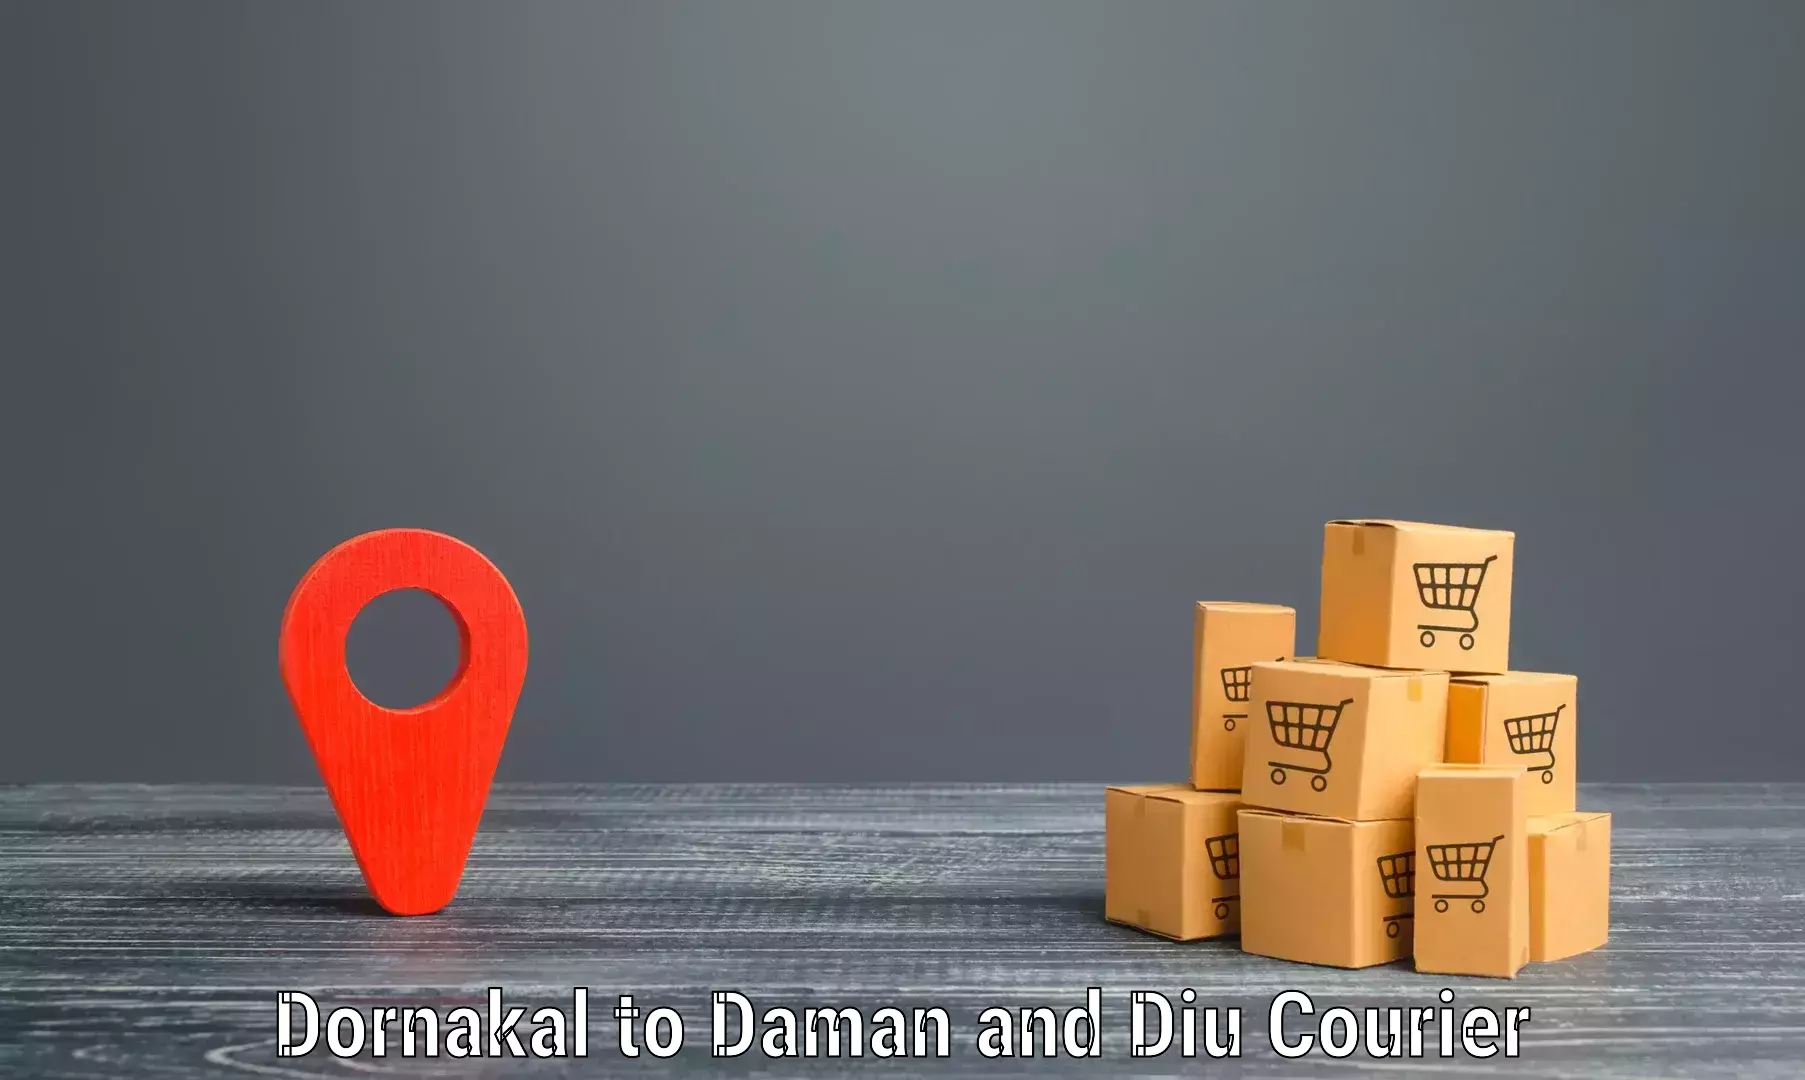 Advanced shipping technology in Dornakal to Daman and Diu